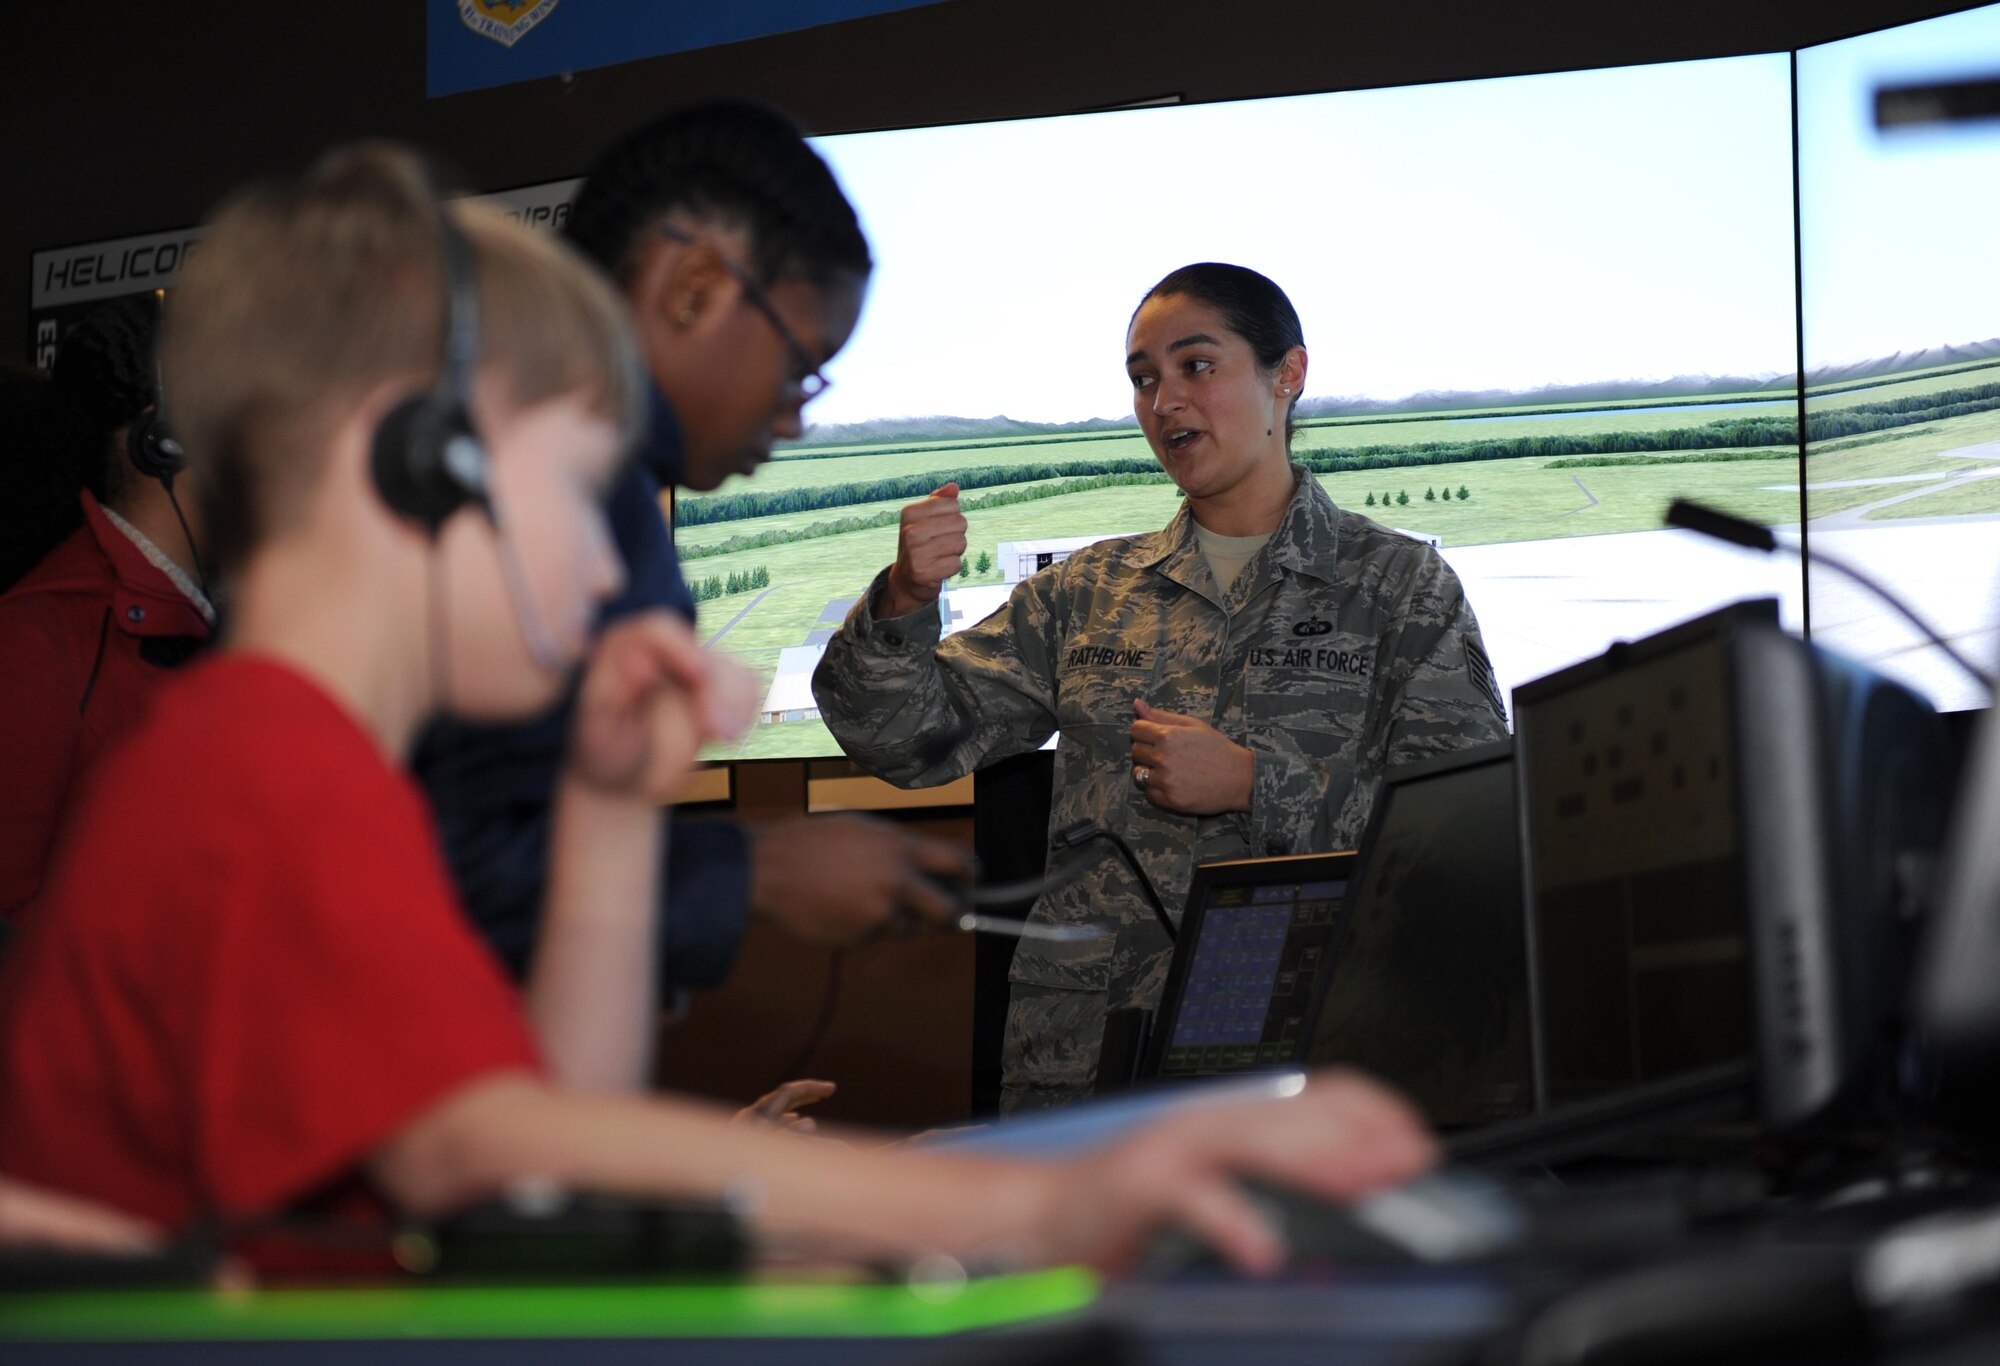 Tech. Sgt. Malena Rathbone, 334th Training Squadron air traffic control instructor, briefs school-aged children on the air traffic control simulator at Cody Hall during Biloxi Career Exploration Day Feb. 11, 2016, Keesler Air Force Base, Miss. The children also toured the 335th TRS weather facility, 81st Security Forces Squadron canine facility, 53rd Weather Reconnaissance Squadron and the Keesler Fire Department. (U.S. Air Force photo by Kemberly Groue)